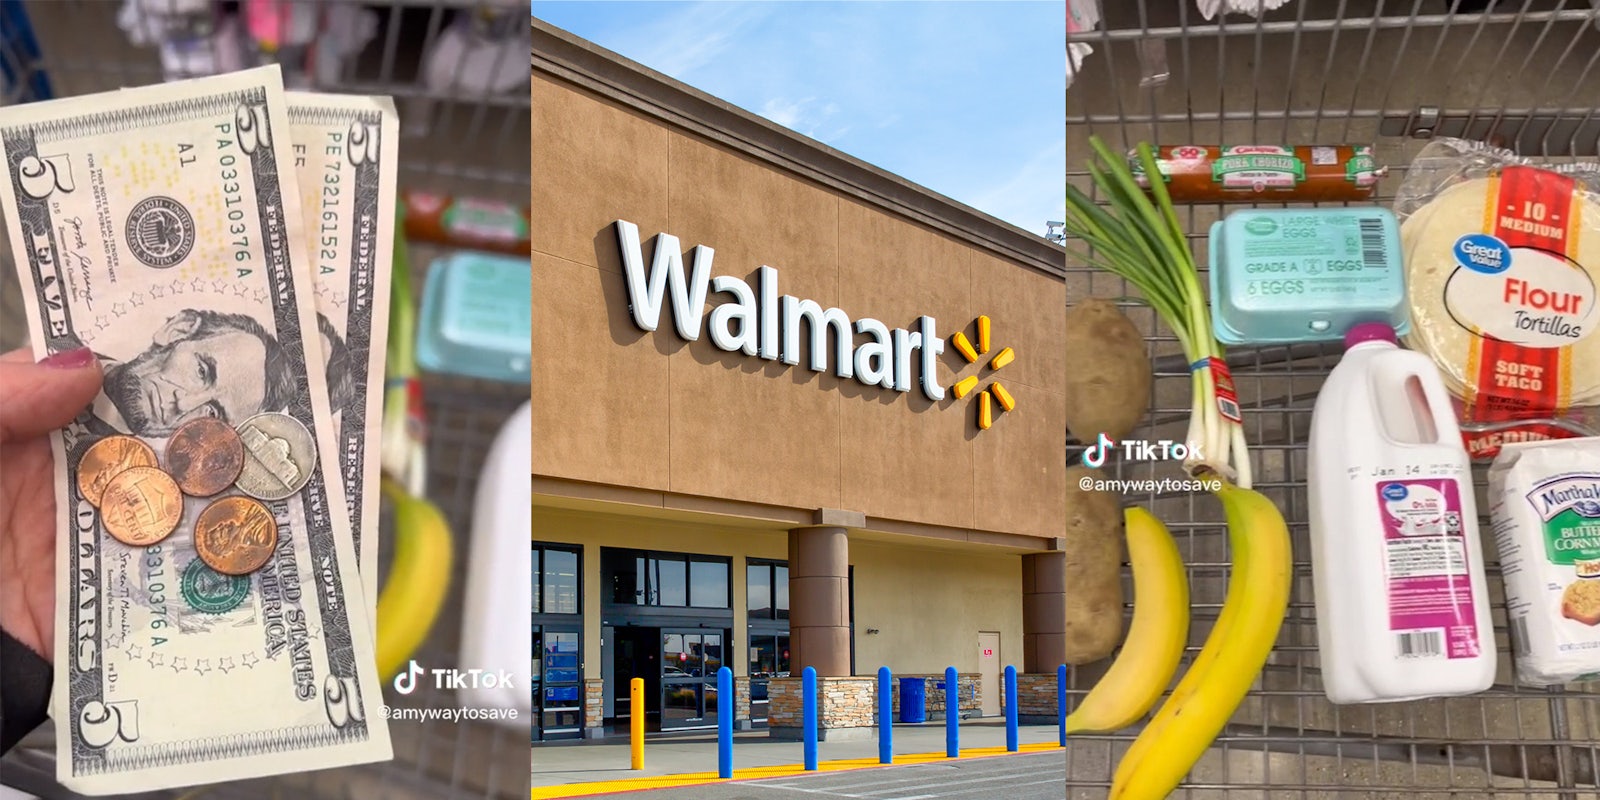 Walmart shopper buys same exact groceries 2 years later—and spends 50% more